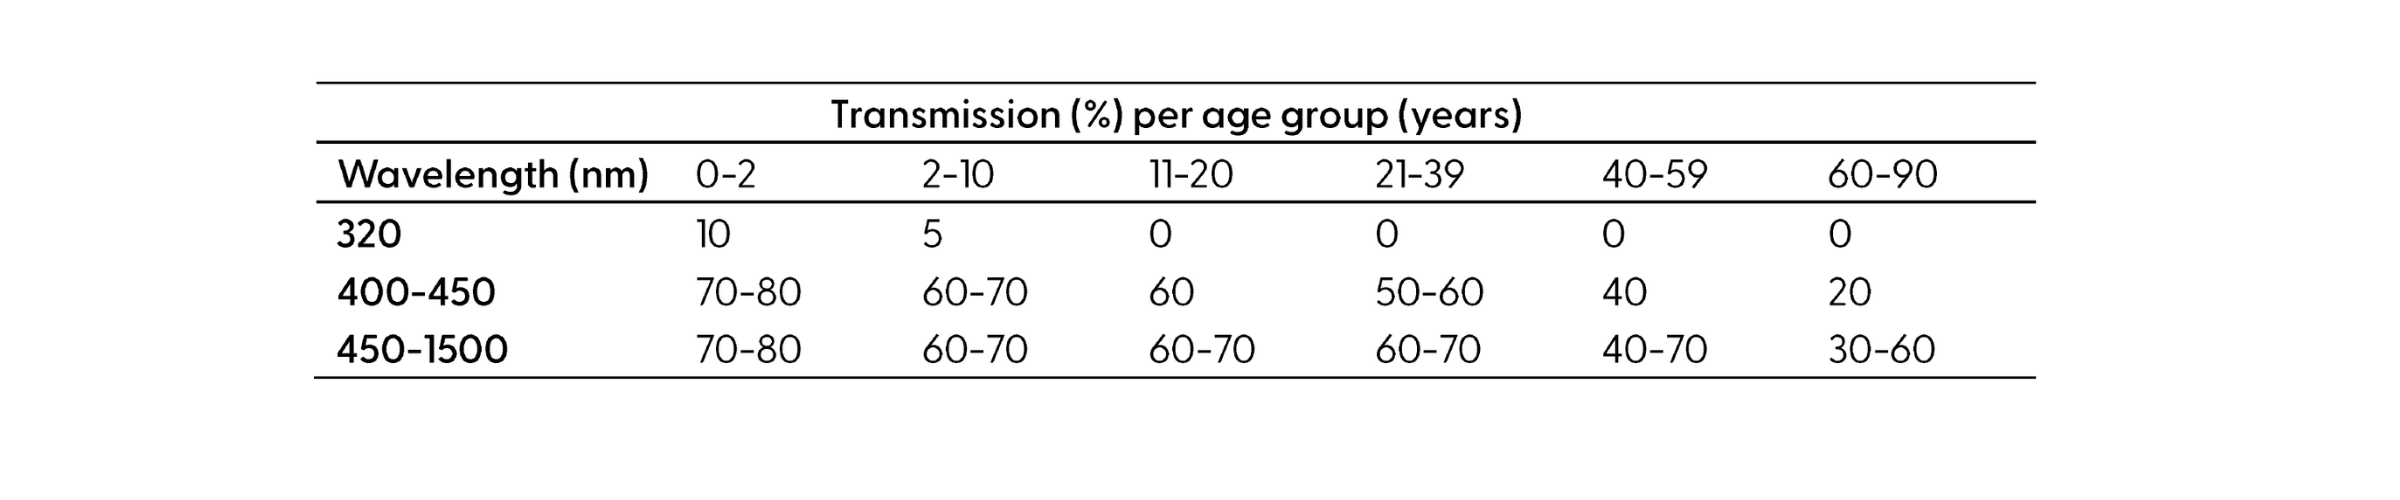 Chart showing % UV Transmission per age group (years)